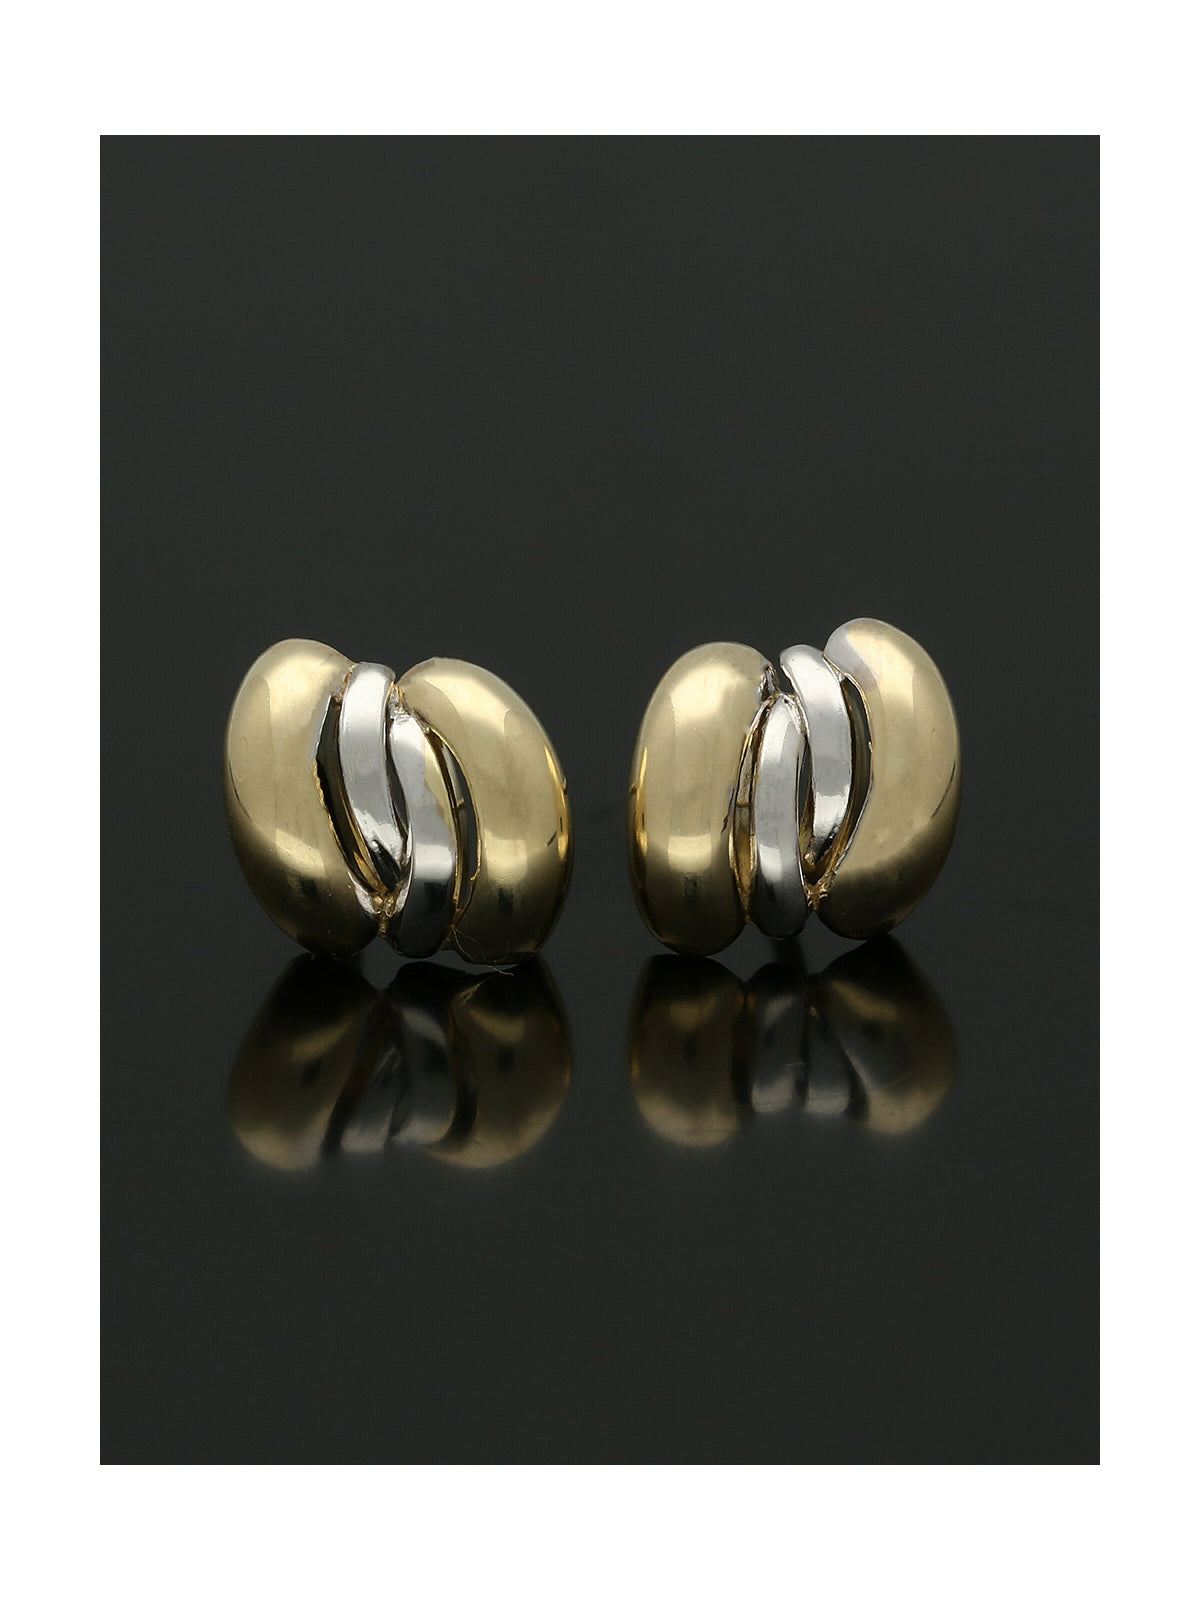 Curved Loop Stud Earrings in 15x18mm 9ct Yellow and White Gold